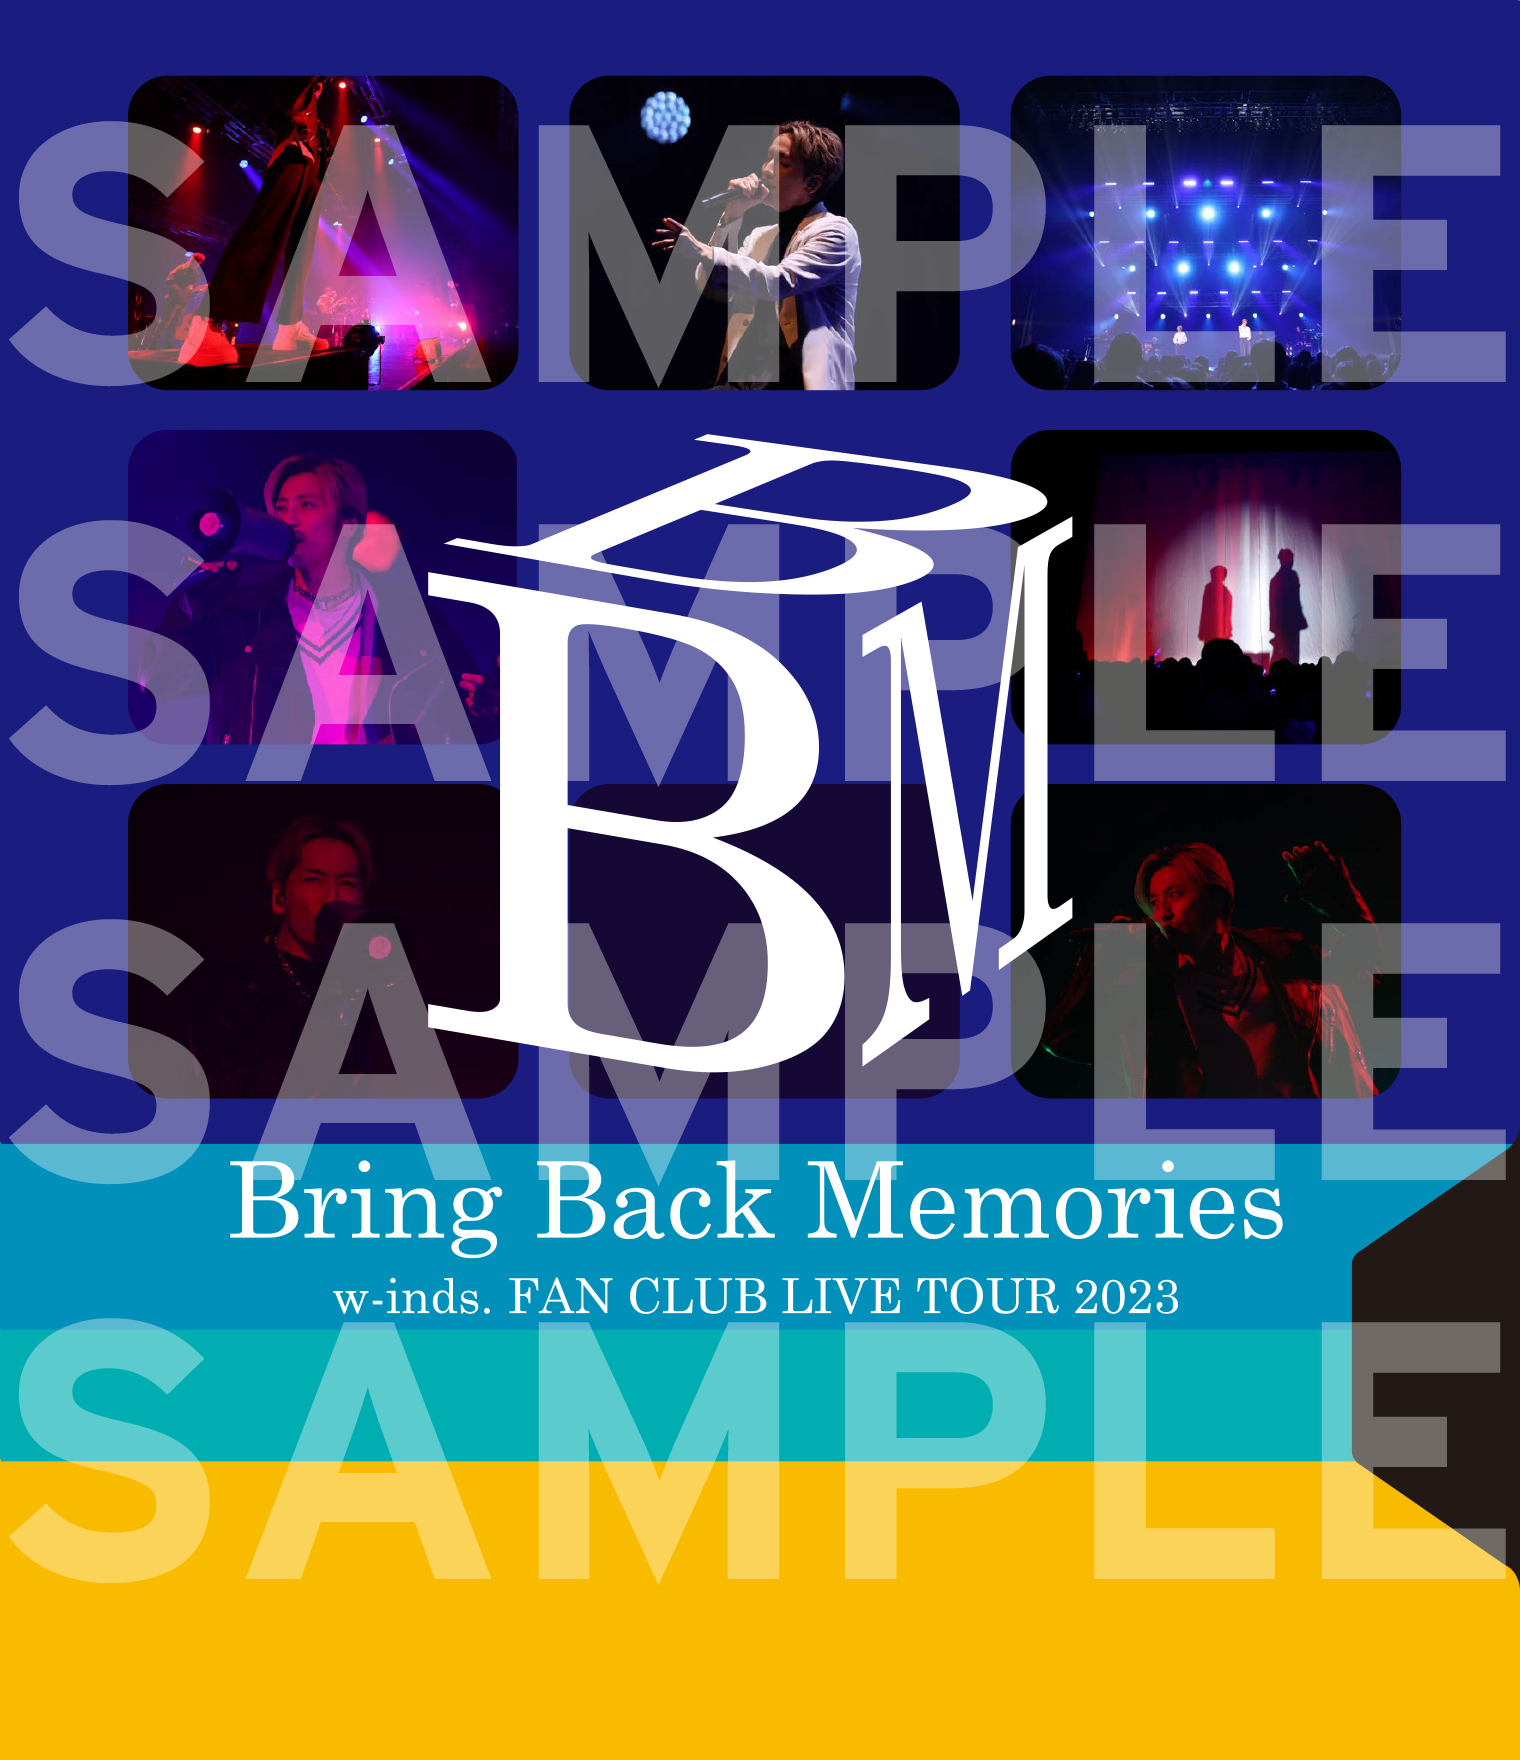 w-inds. FAN CLUB LIVE TOUR 2023 ~Bring back memories~」DVD/Blu-ray 